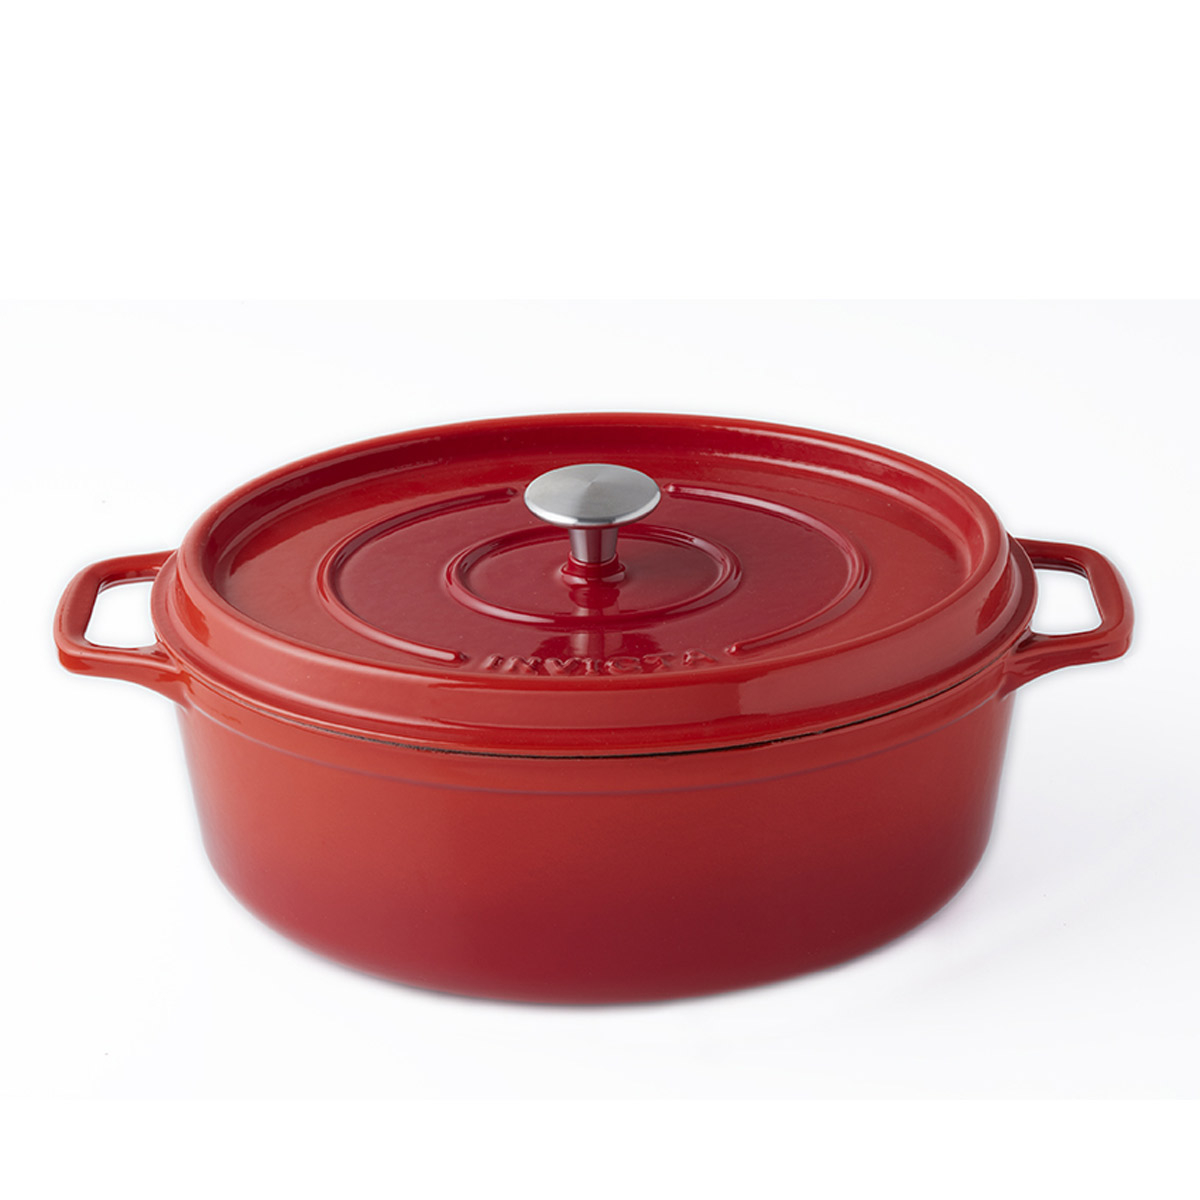 Invicta Cocotte oval 35 cm / 8,5 L - Gusseisen rot